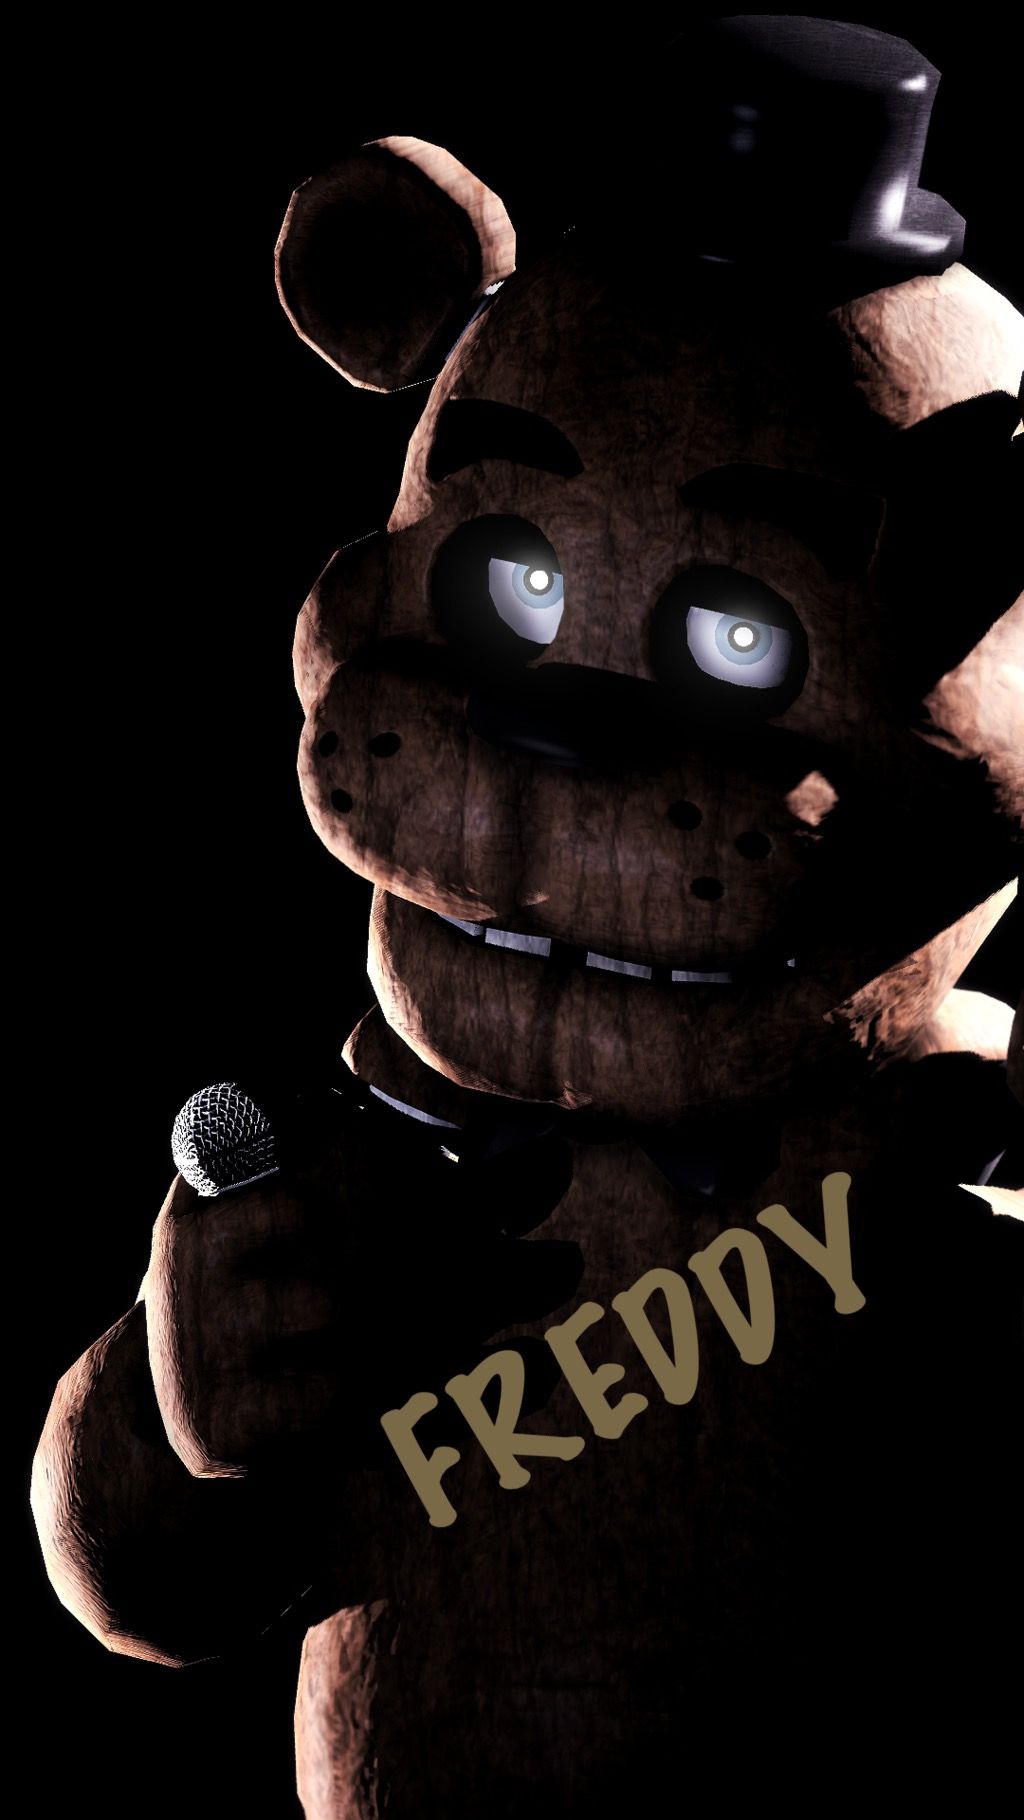 fnaf freddy wallpaper,fictional character,animation,fiction,darkness